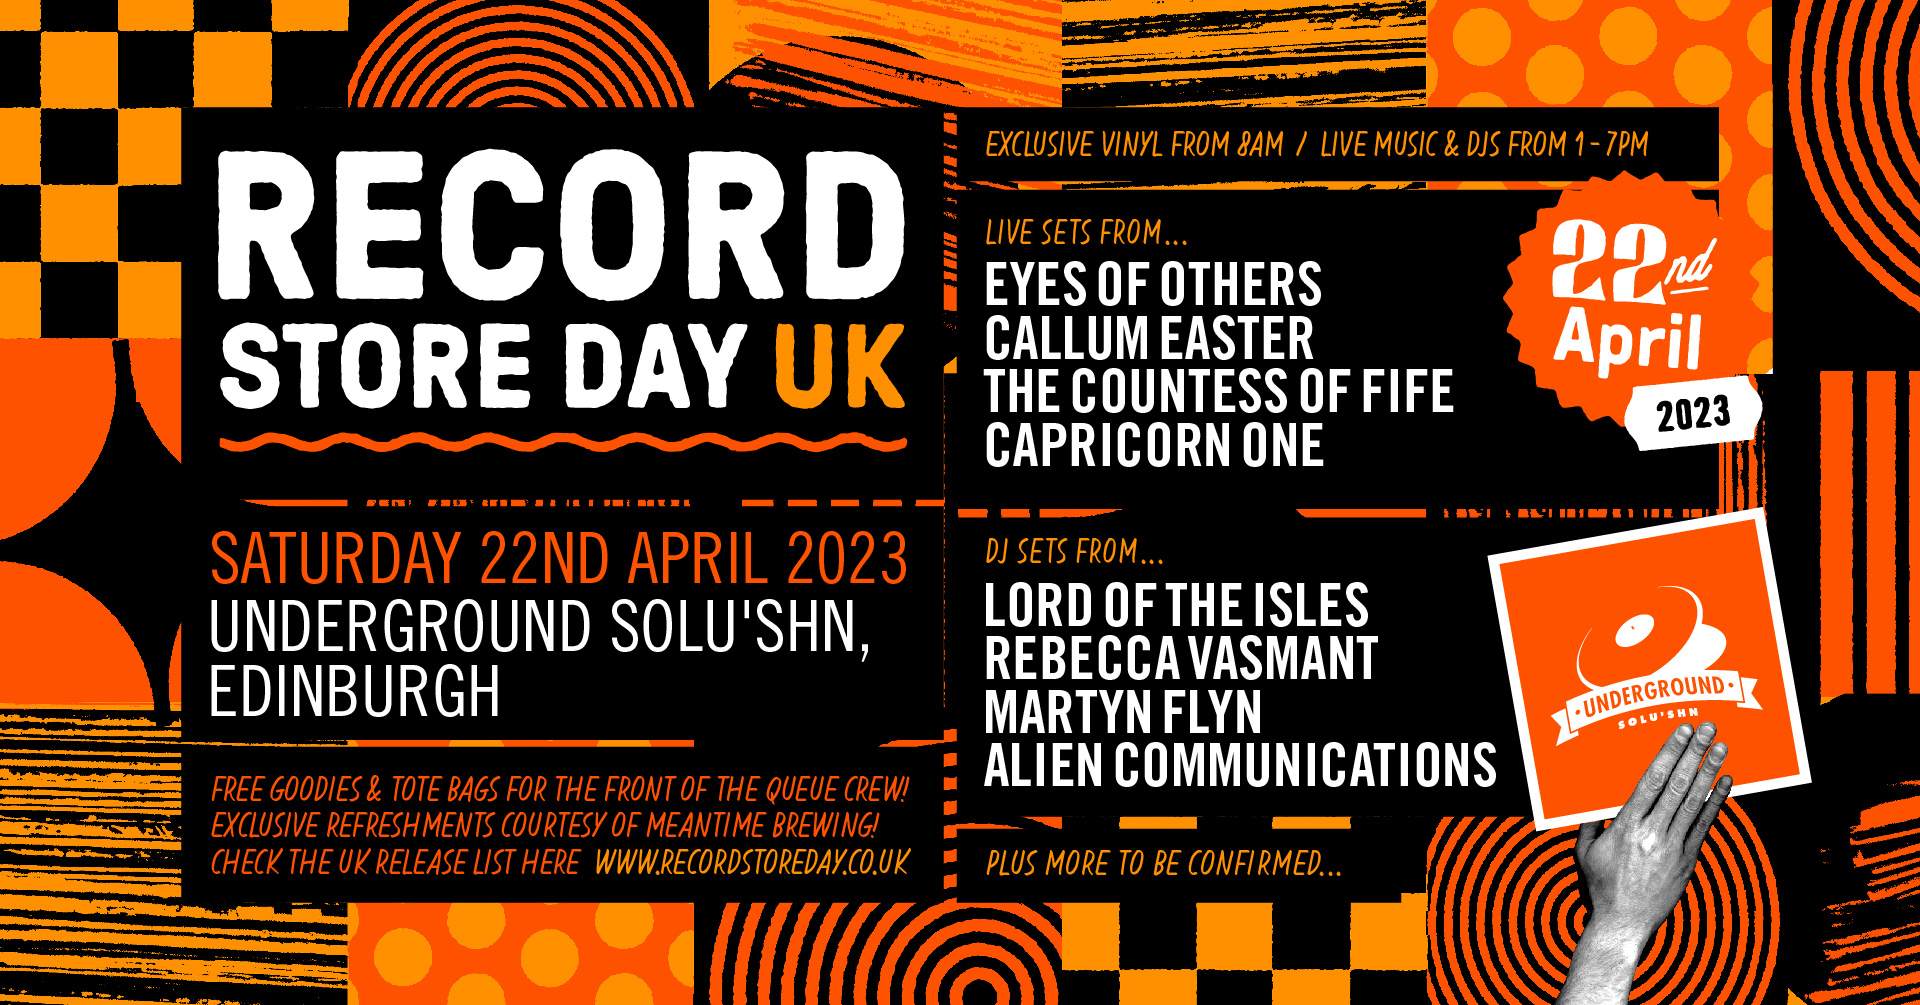 Record Store Day feat. Lord of the Isles, Eyes of Others, Alien Communications and more - フライヤー表